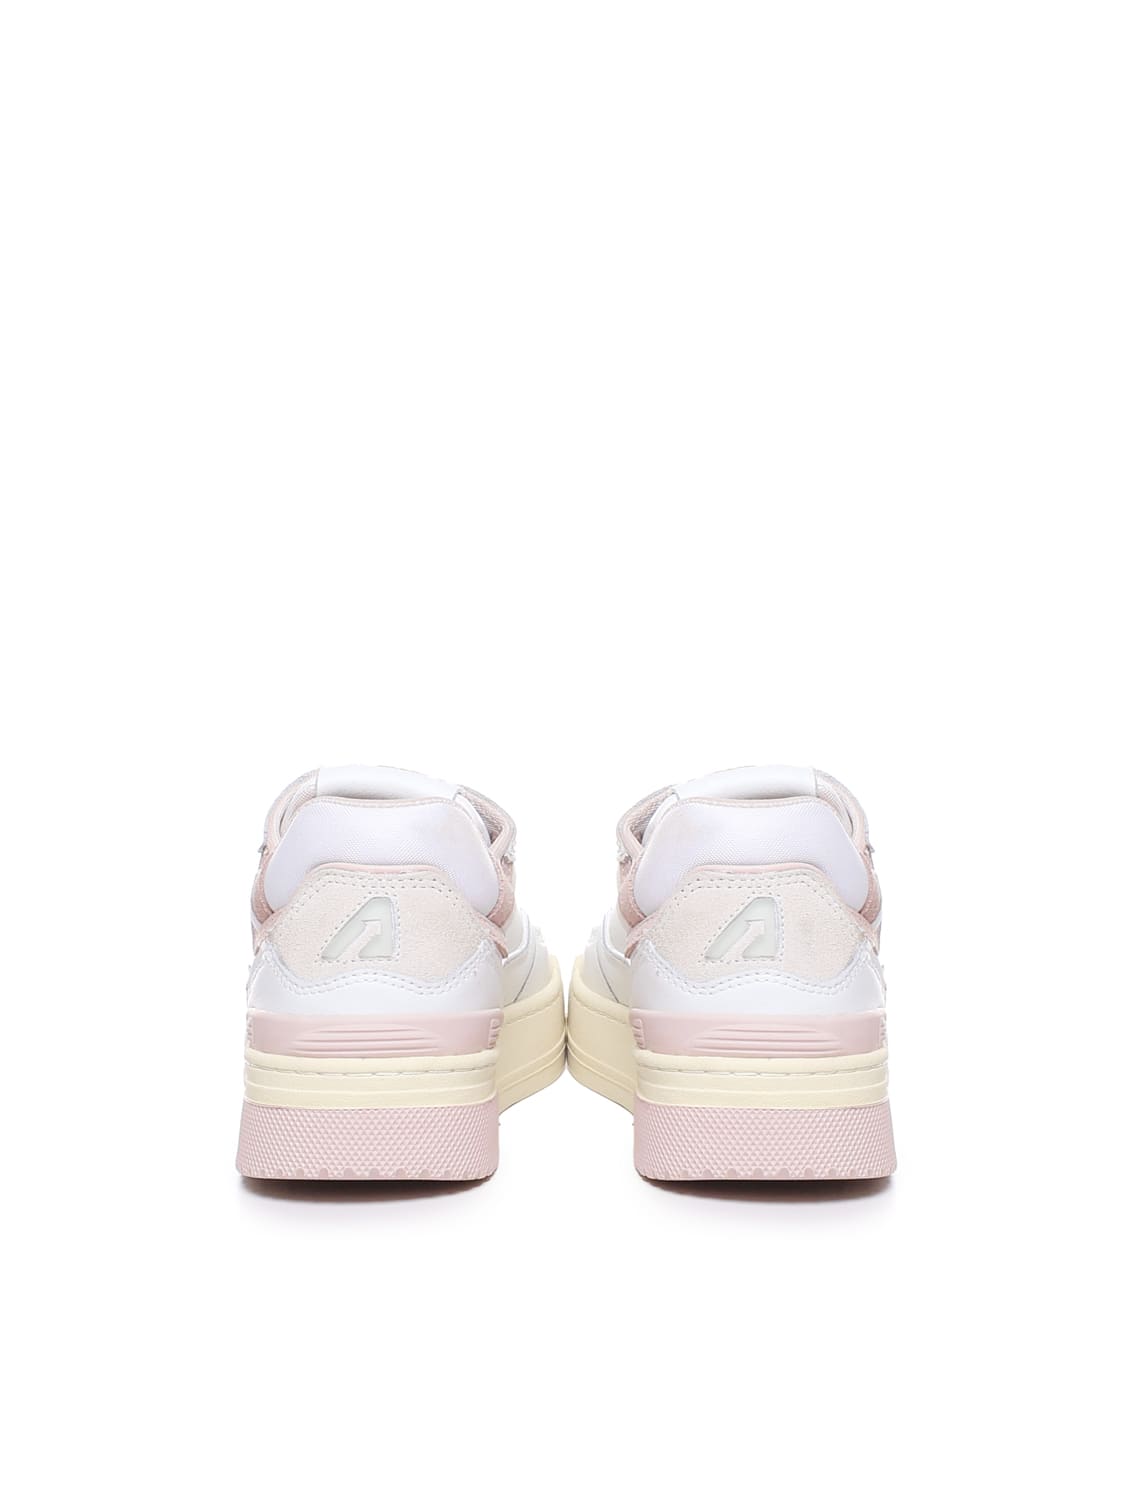 Shop Autry Leather Clc Sneakers In White, Pink